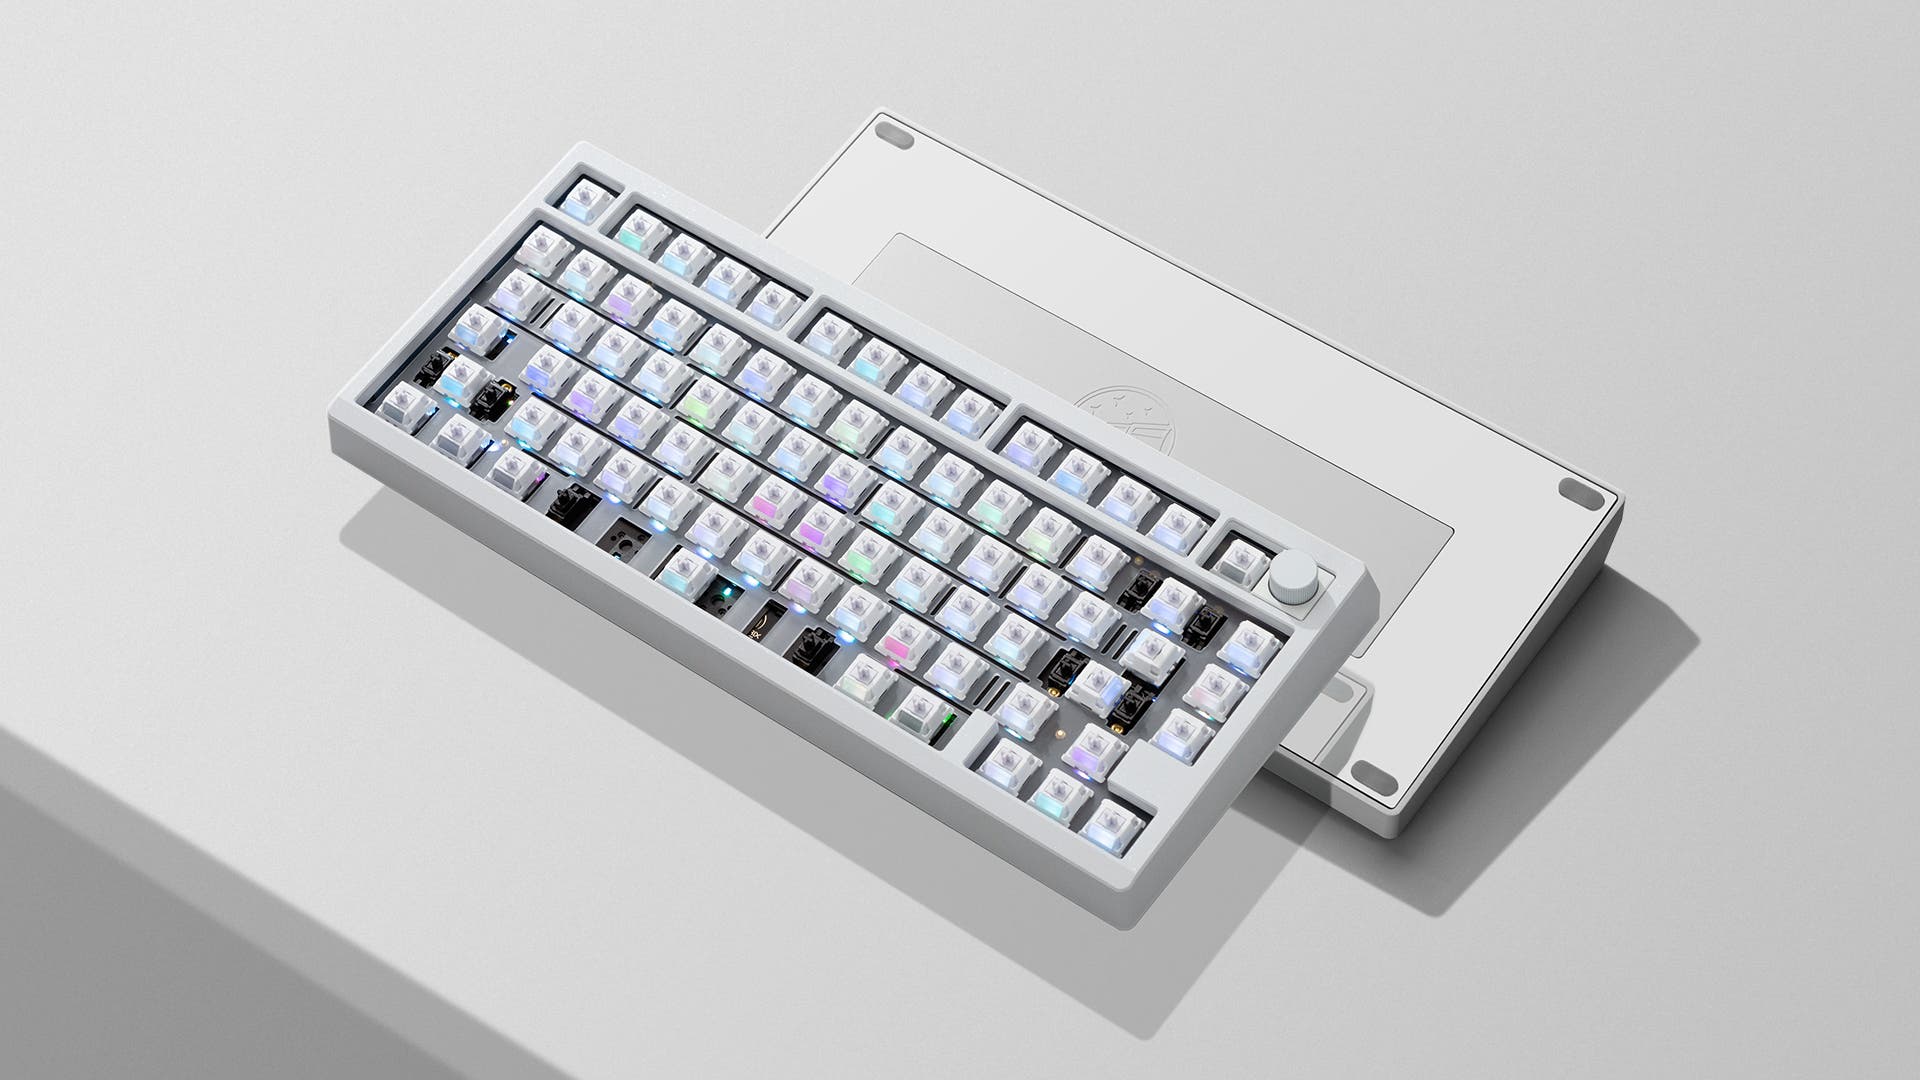 [Group-Buy] Meletrix Zoom75 KLE - Partially Assembled Keyboard Kit [November Batch] EE White with E-White Knob & Weight and Morandi Switches / Tri-mode Flex Cut PCB